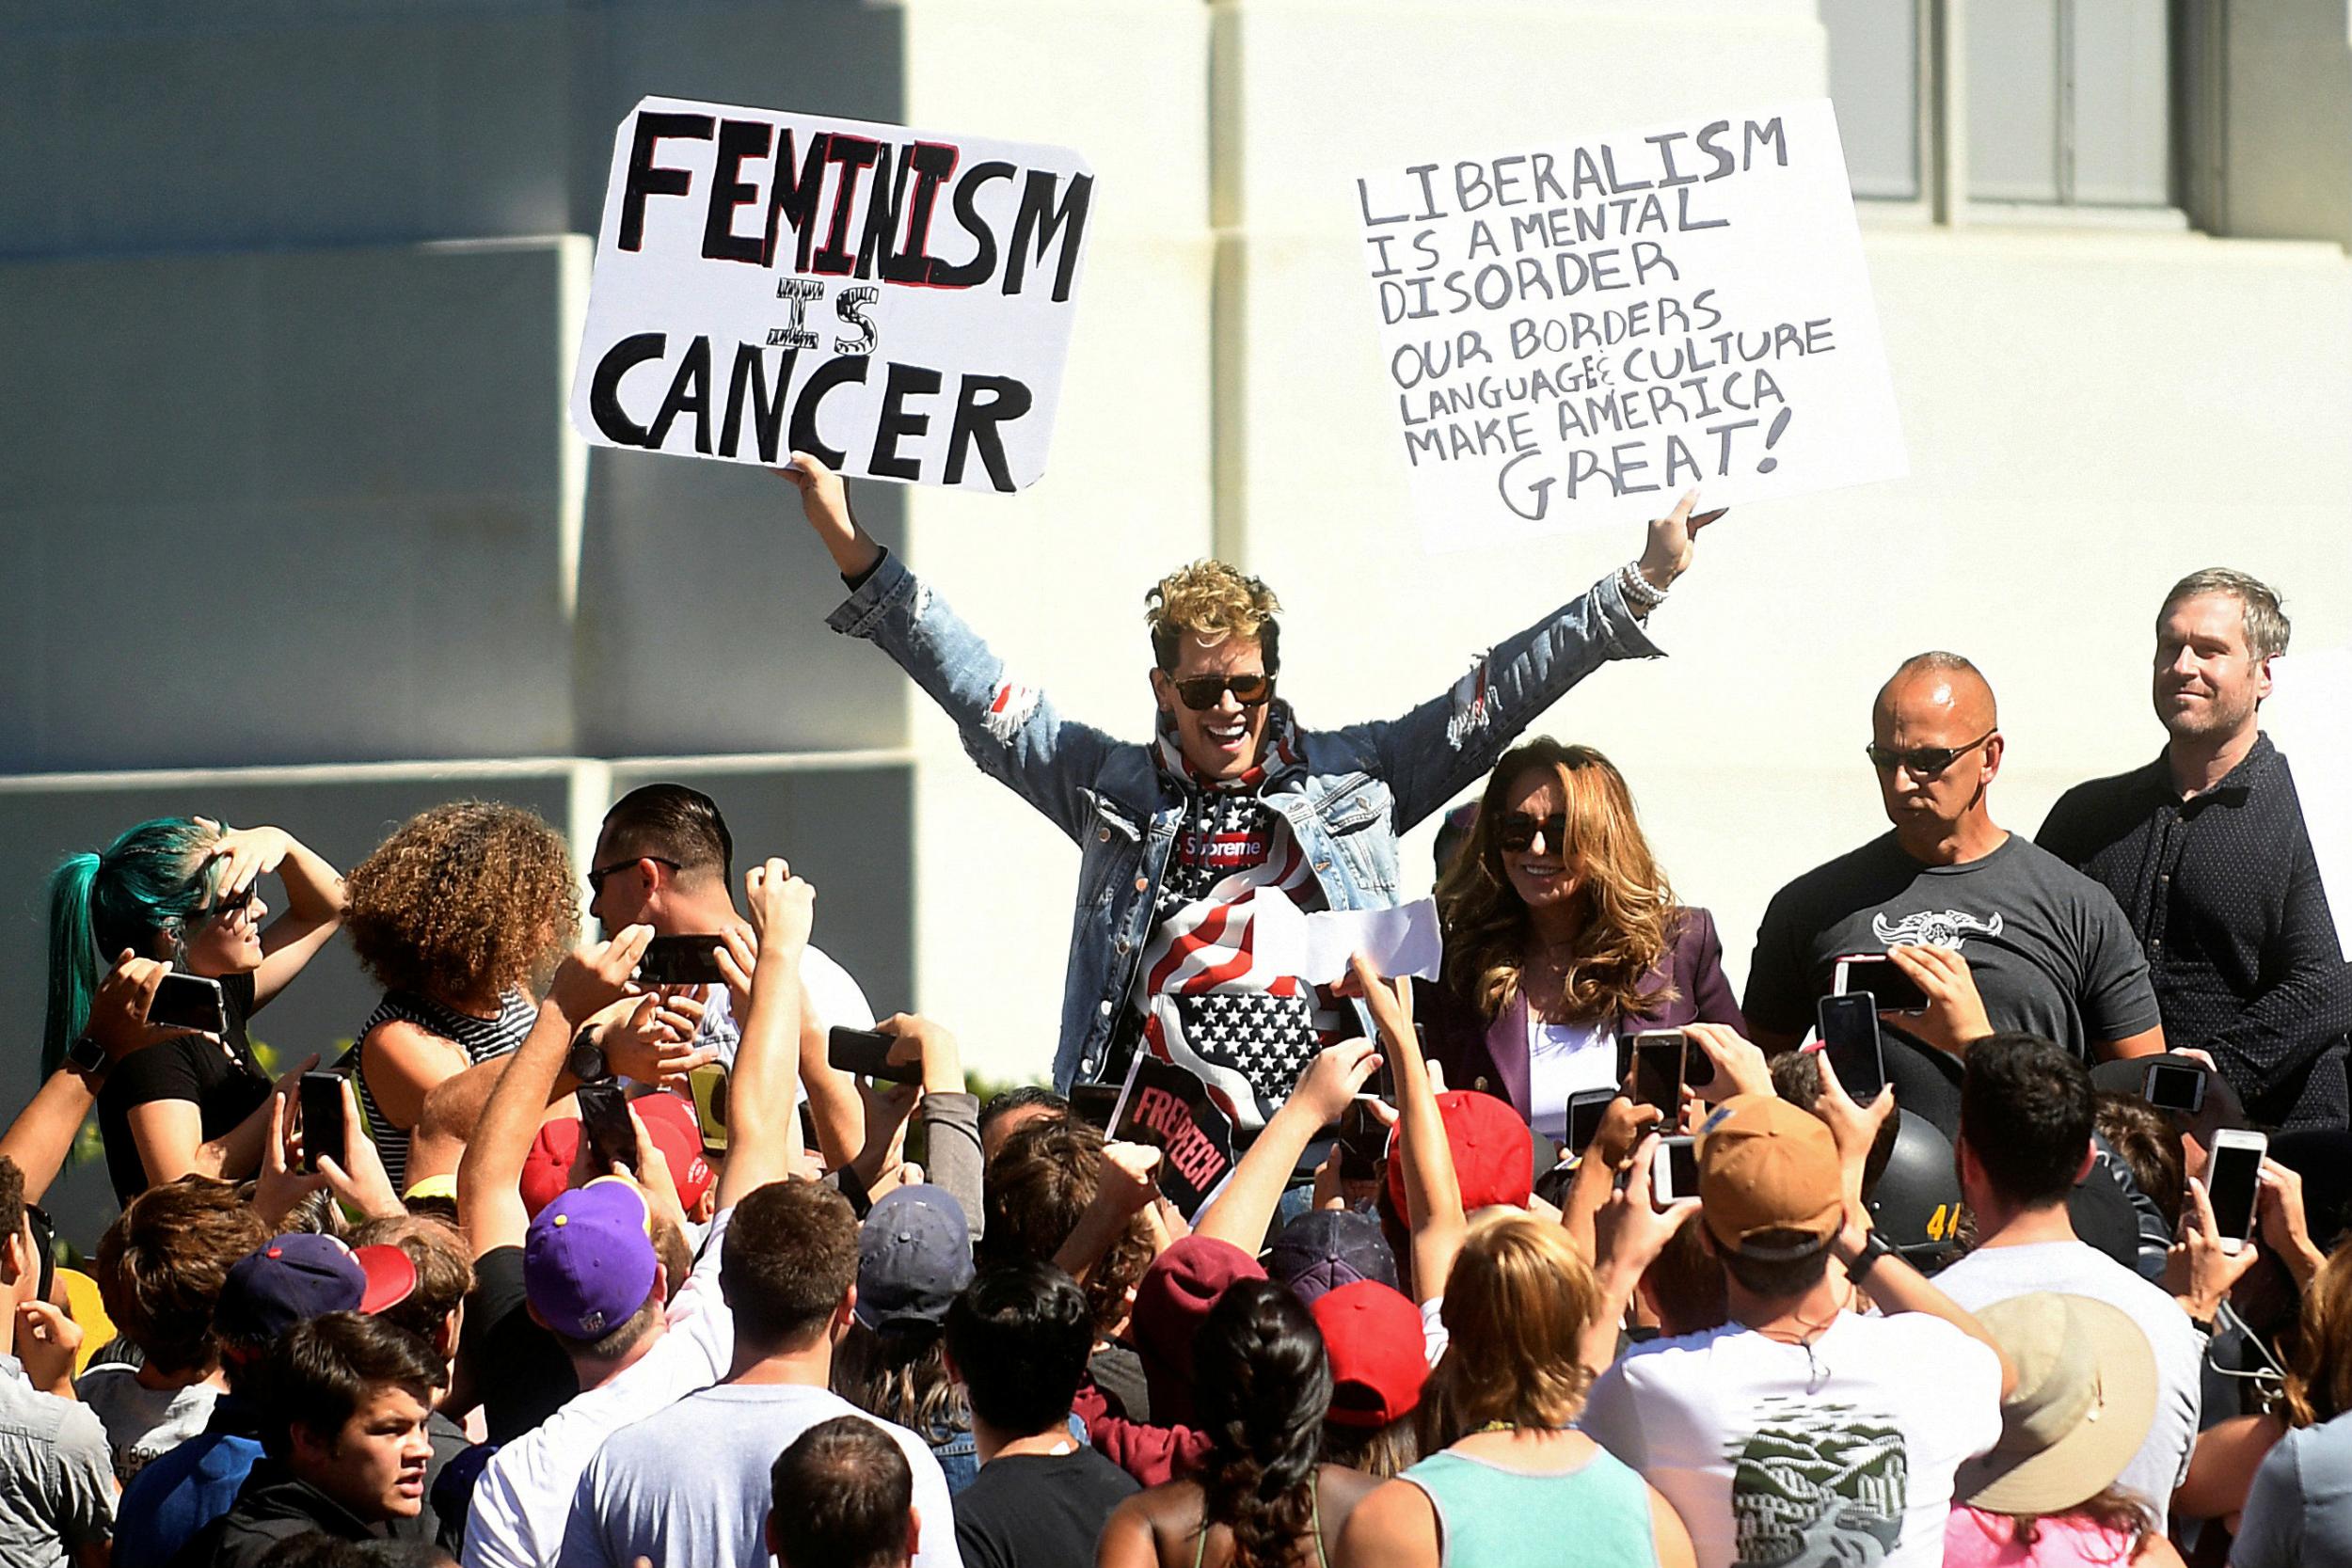 Milo Yiannopoulos holds up characteristically provocative signs while speaking at the University of California in Berkeley, California, September 24, 2017